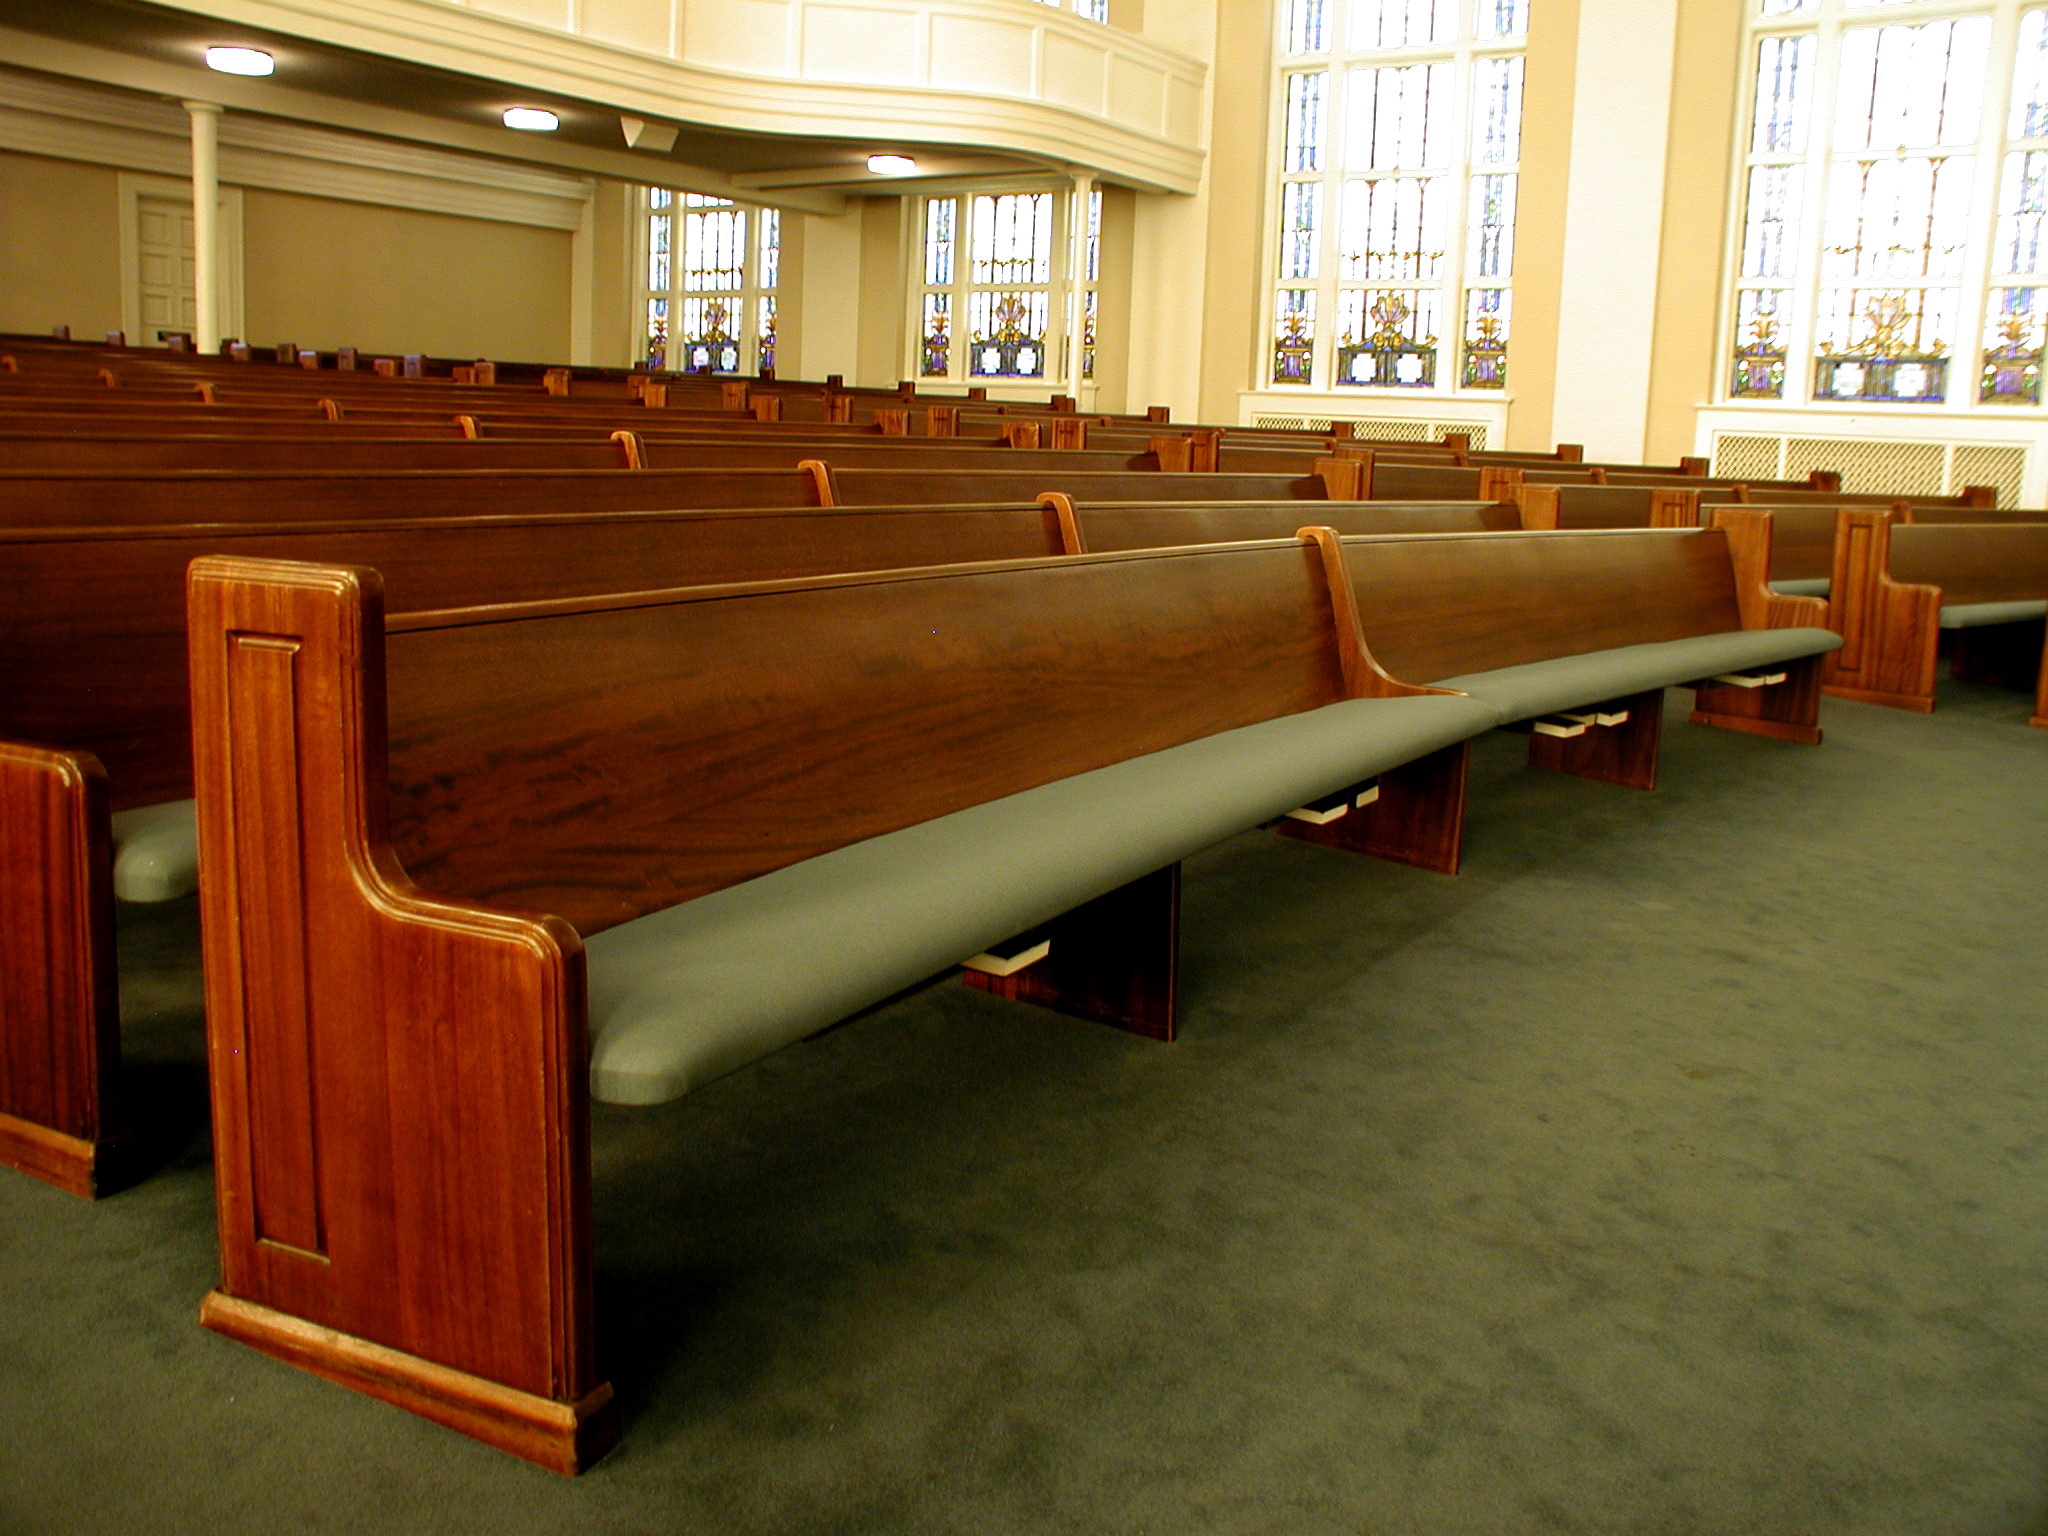 Pew Upholstery  Church Pew Cushions